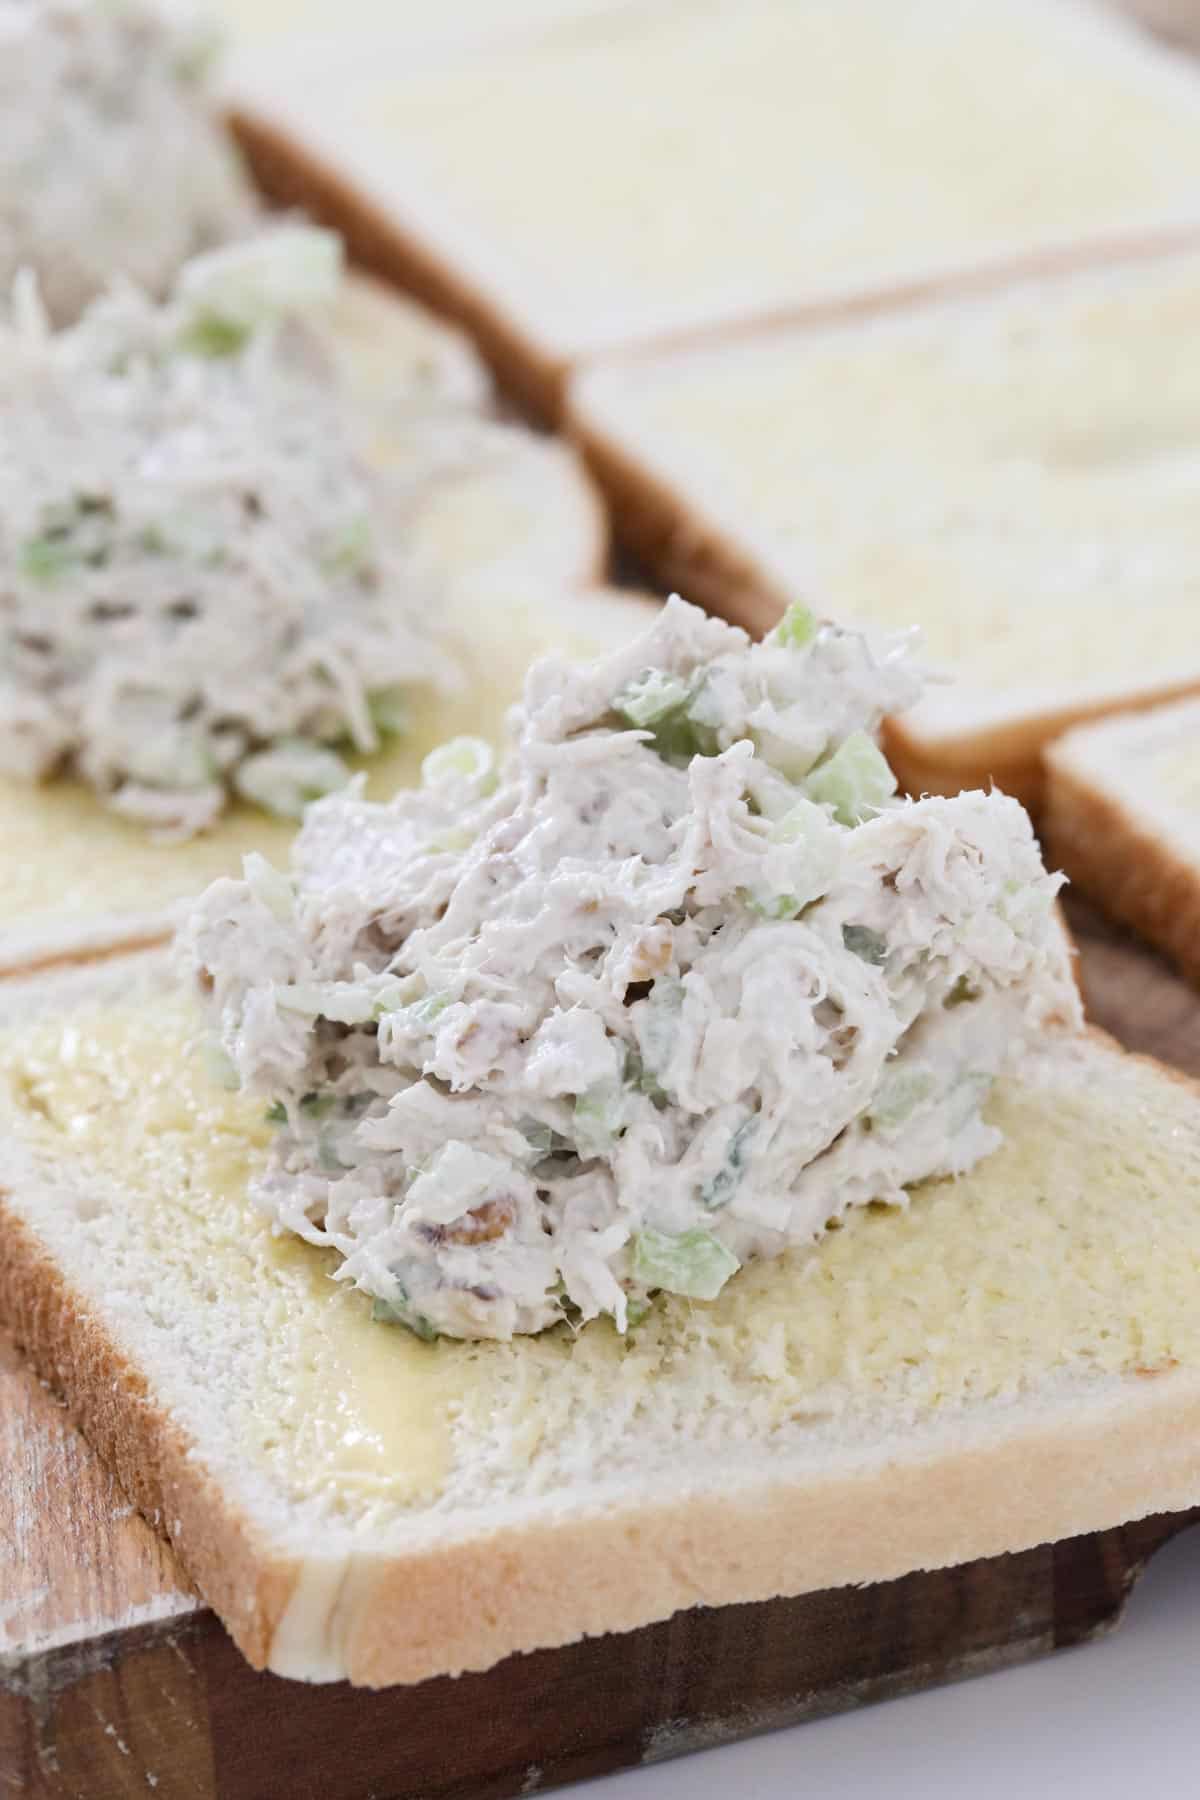 A spoonful of the creamy shredded chicken filling on a slice of buttered white bread.